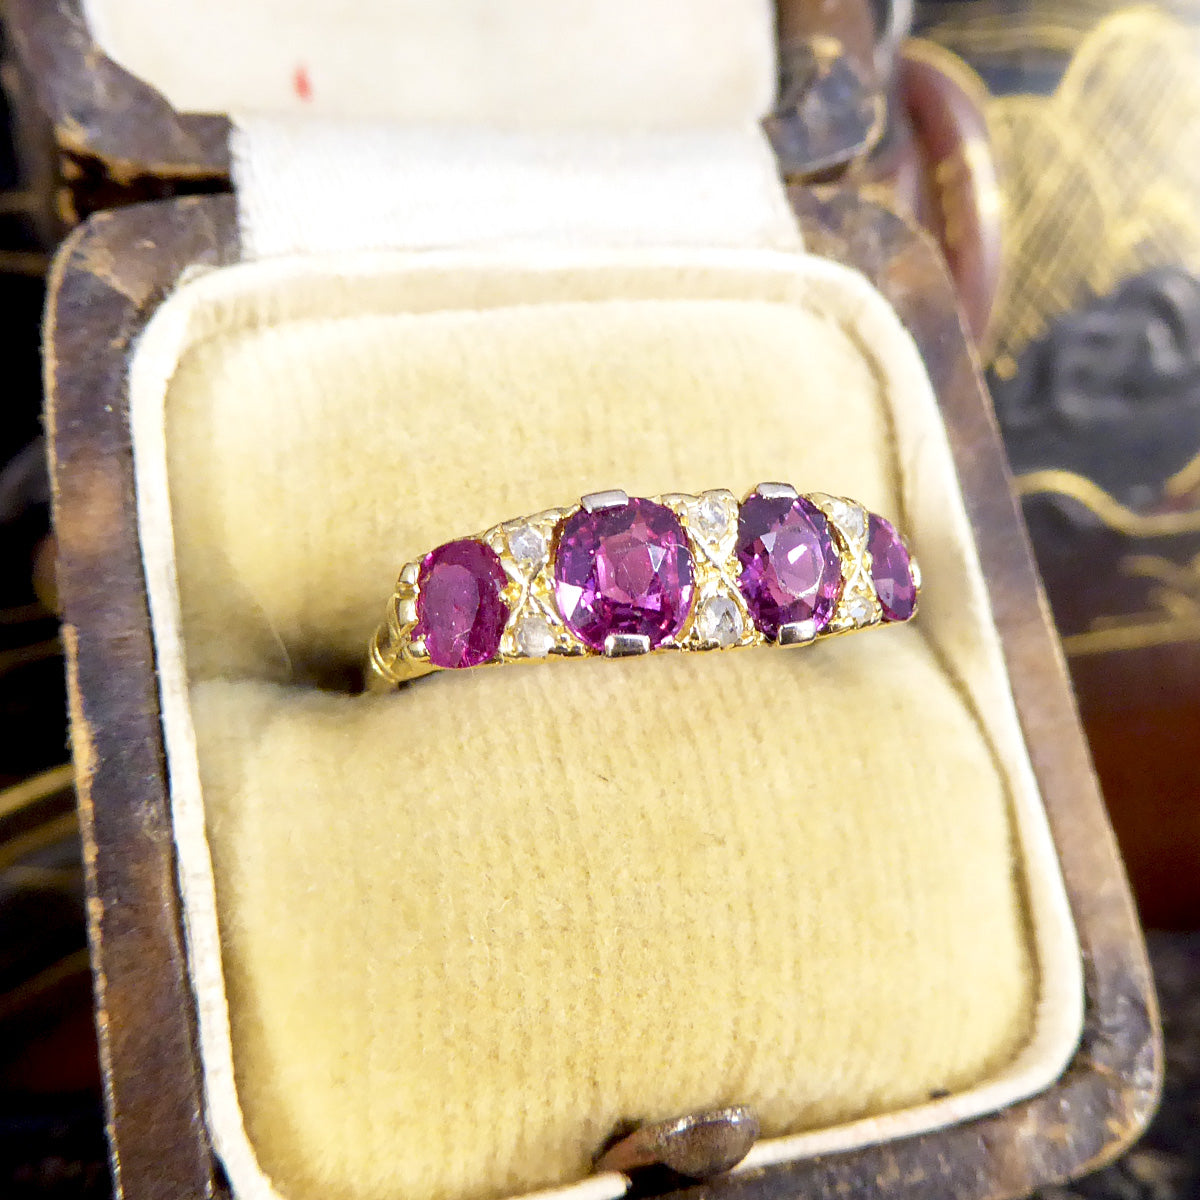 Antique Edwardian 1.18ct Ruby Four Stone Ring with Diamond Spacers Modelled in 18ct Yellow Gold